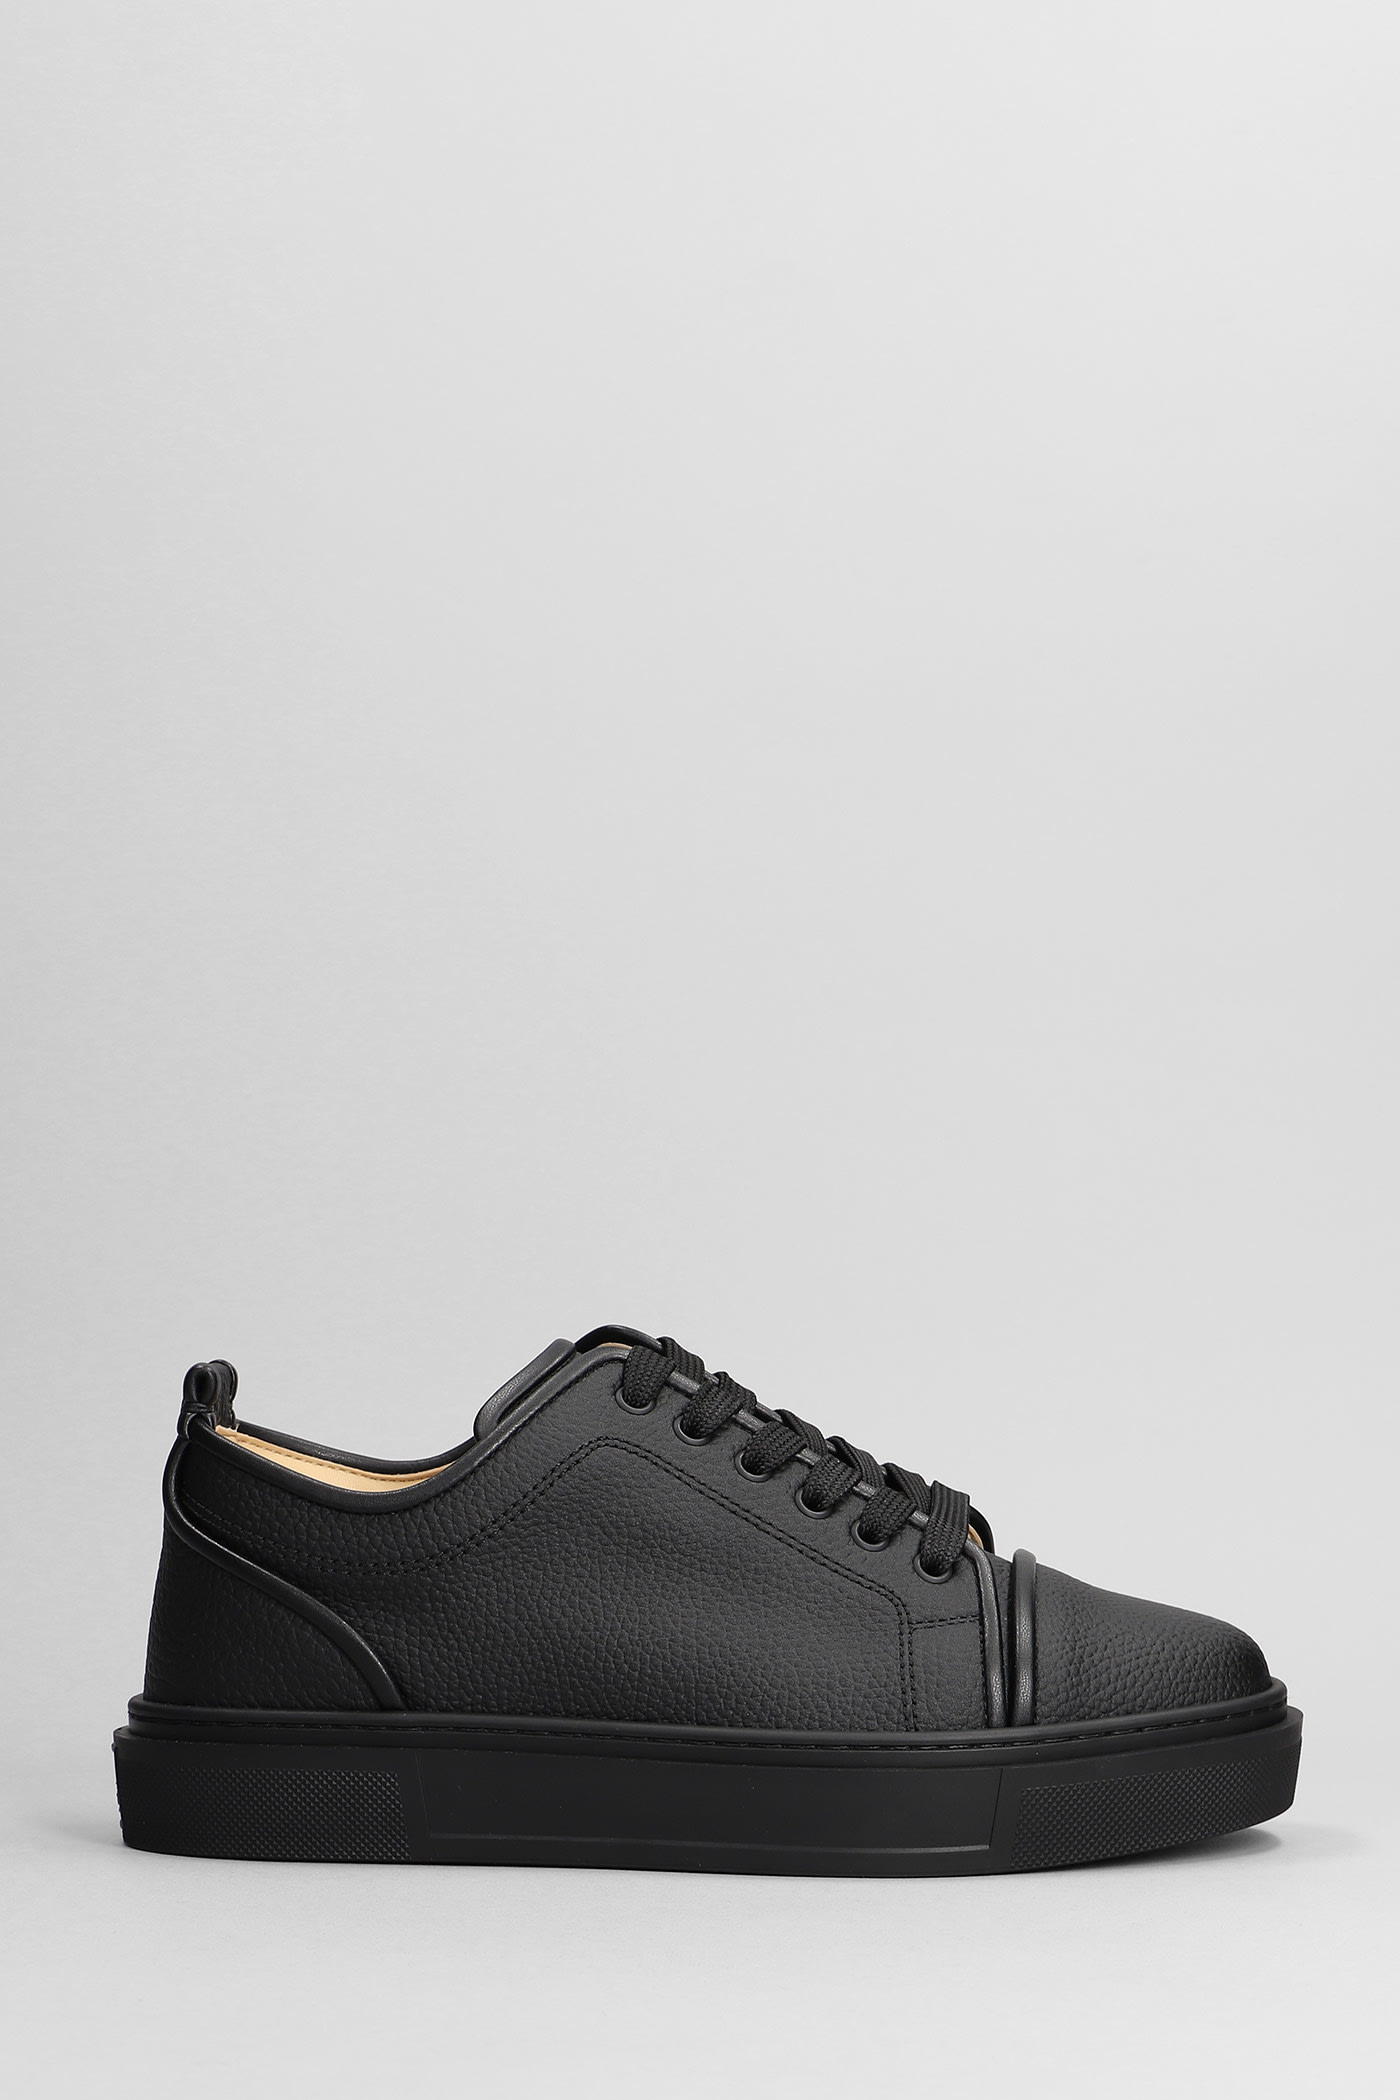 CHRISTIAN LOUBOUTIN ADOLON JUNIOR SNEAKERS IN BLACK LEATHER